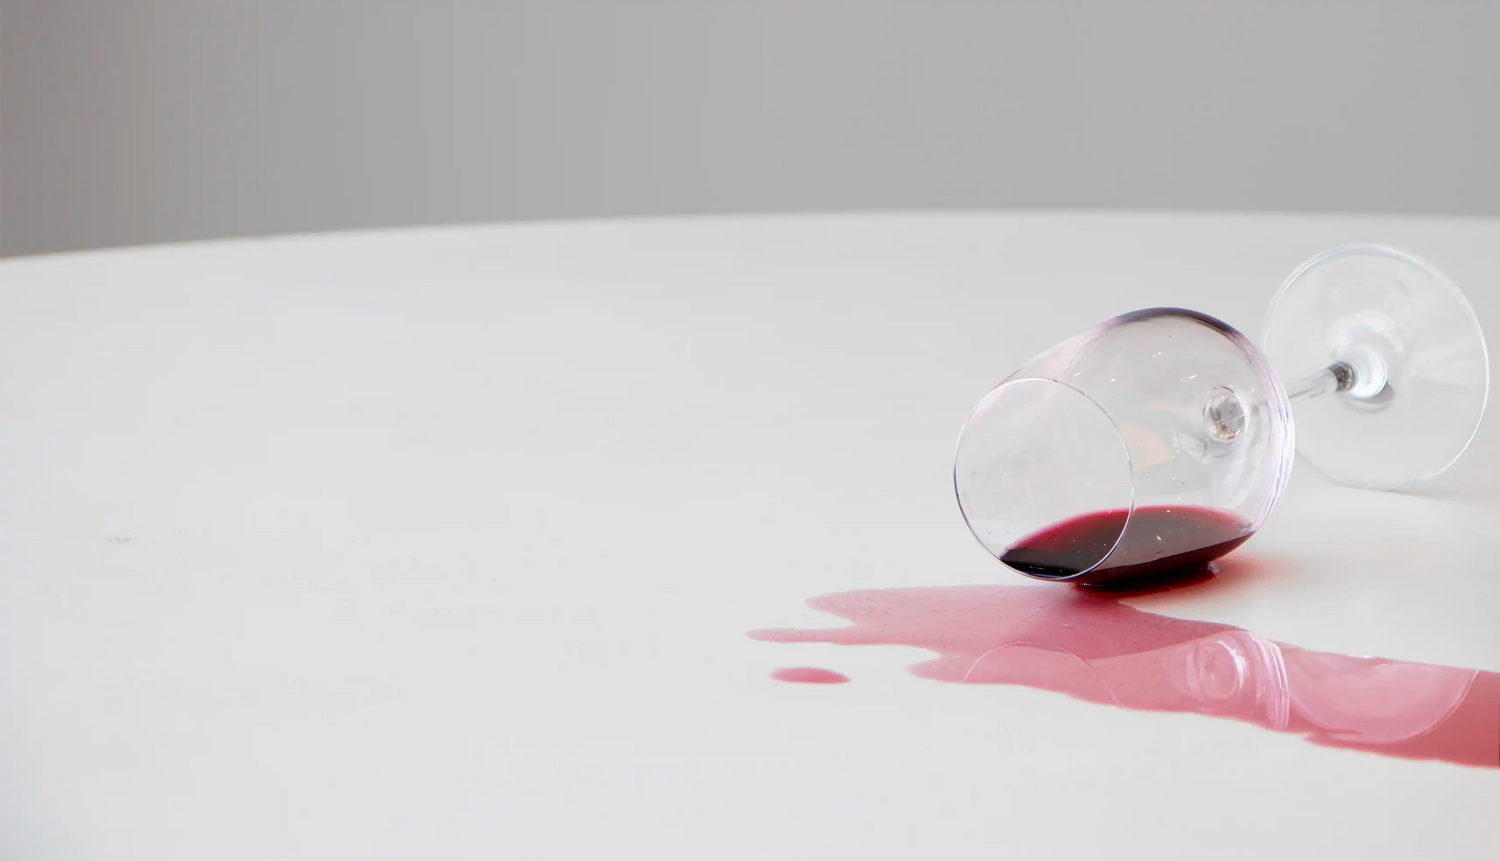 A wine glass tipped over spilling red wine on a white concrete benchtop.